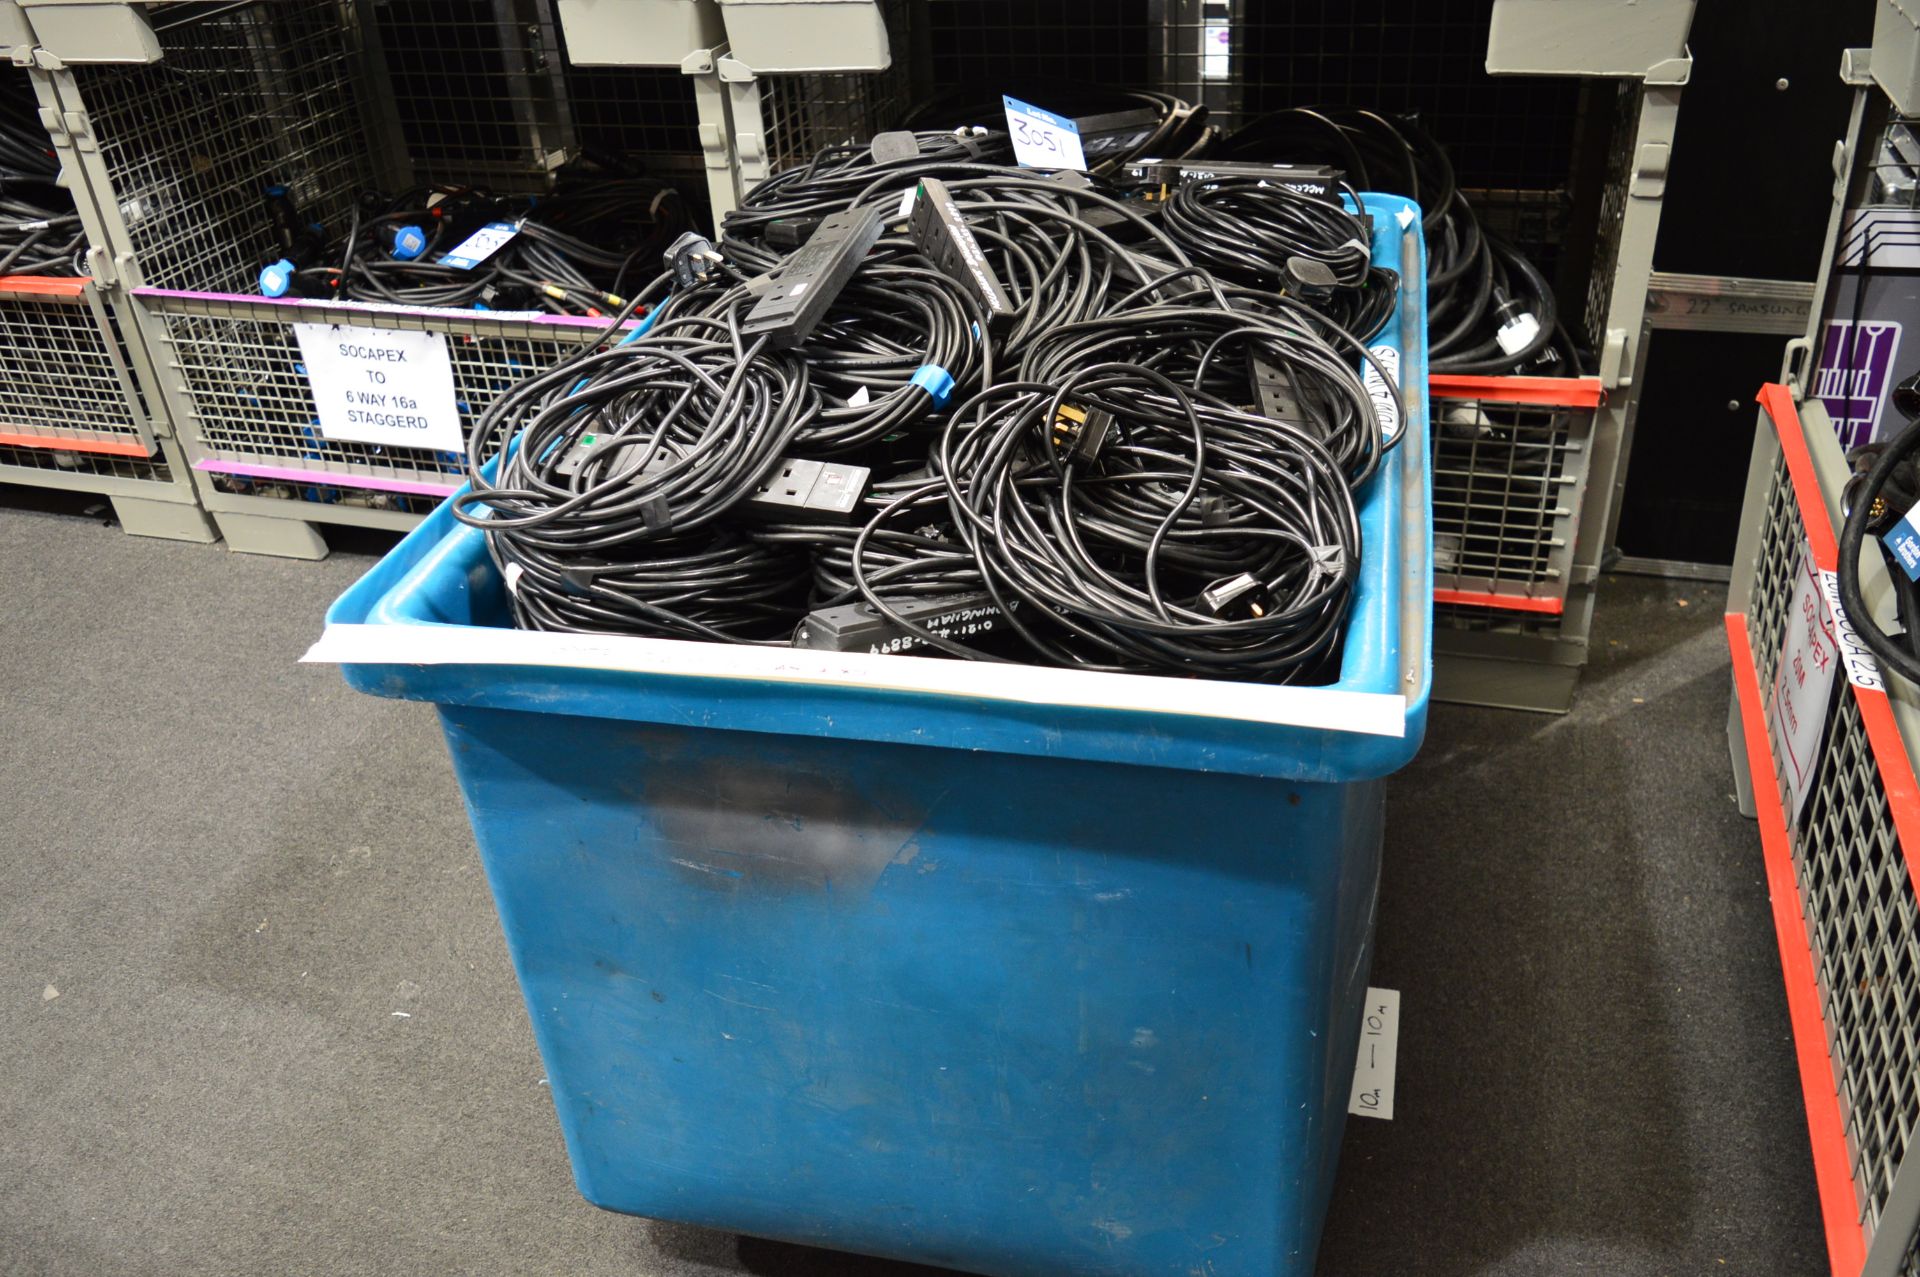 Large quantity of 13 amp 10m four way extension cables in large lin bin: Unit 500, Eckersall Road,